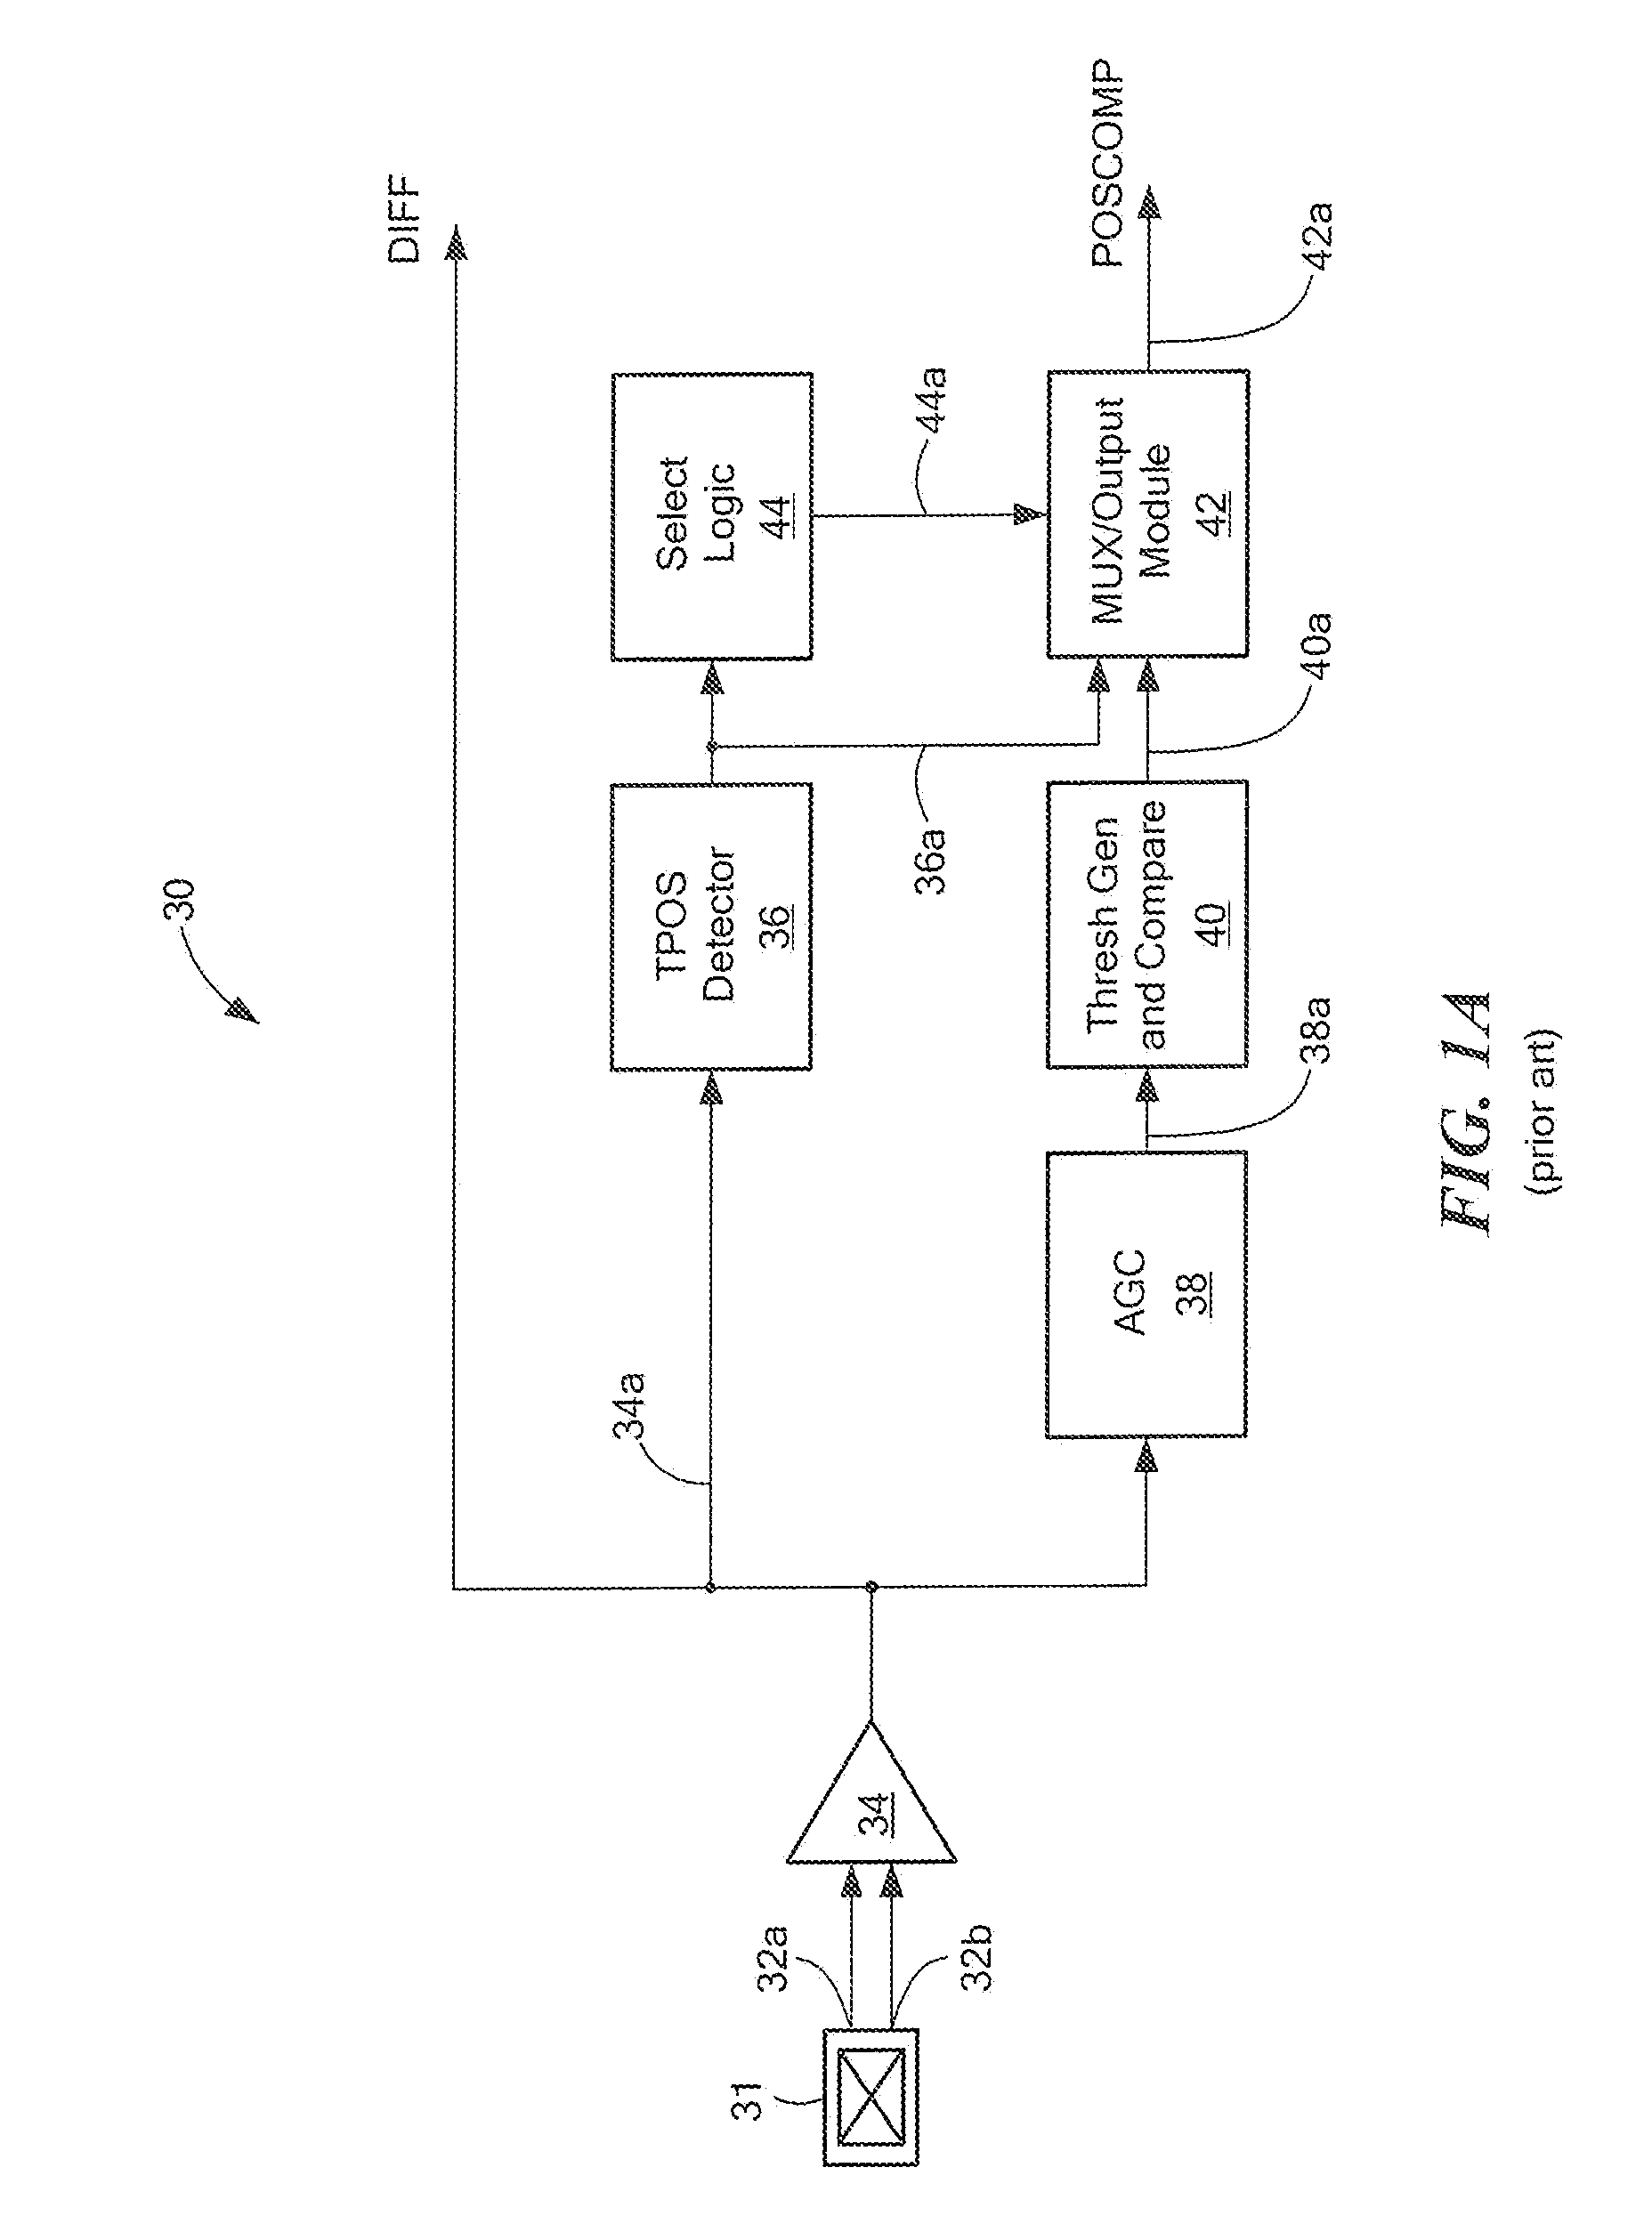 Circuits and Methods for Generating a Threshold Signal Used in a Motion Detector In Accordance With a Least Common Multiple of a Set of Possible Quantities of Features Upon a Target